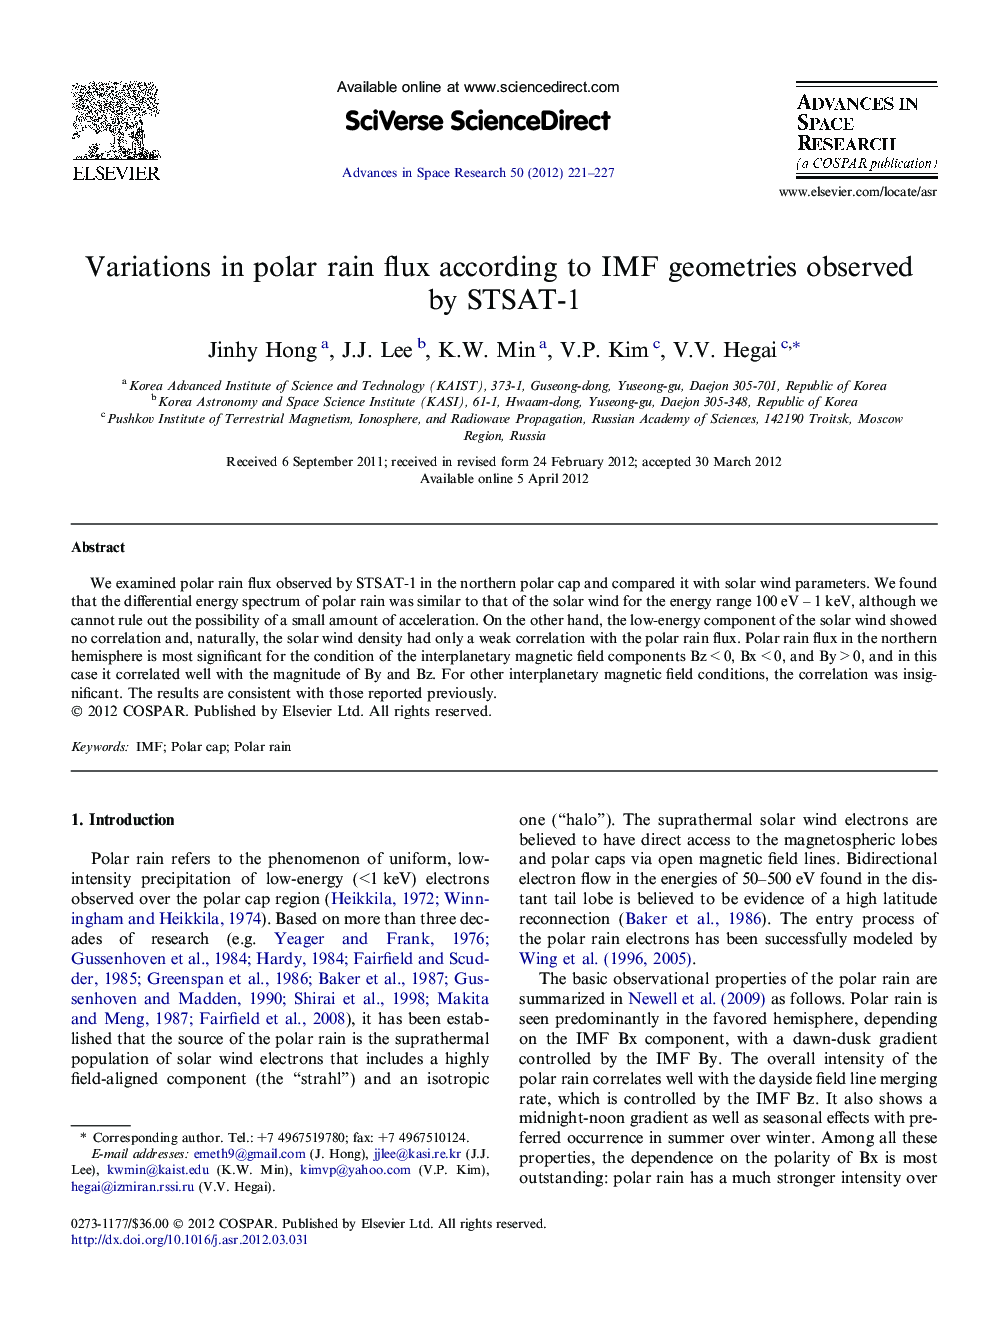 Variations in polar rain flux according to IMF geometries observed by STSAT-1